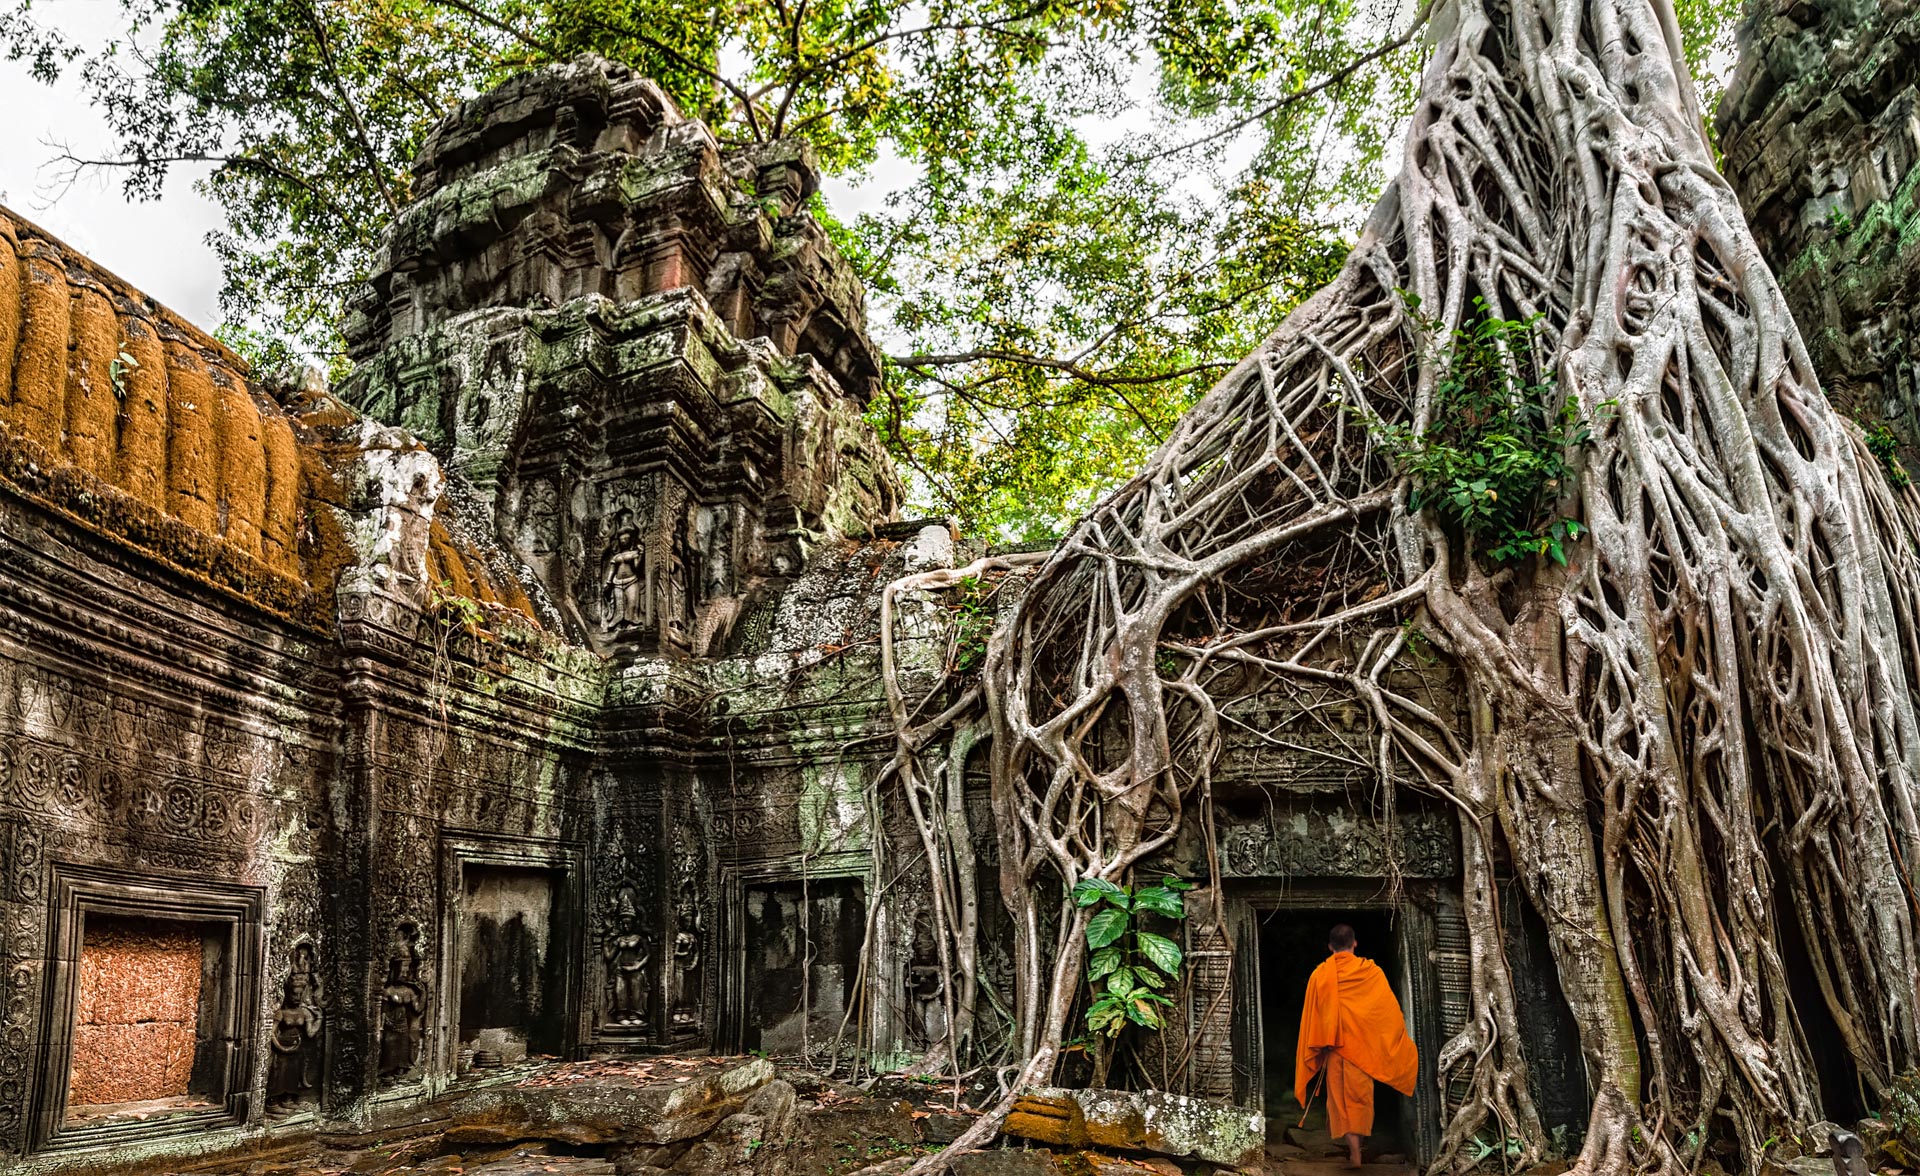 /fm/Files//Pictures/Ido Uploads/Asia/cambodia/All/ANGKOR THOM.jpg